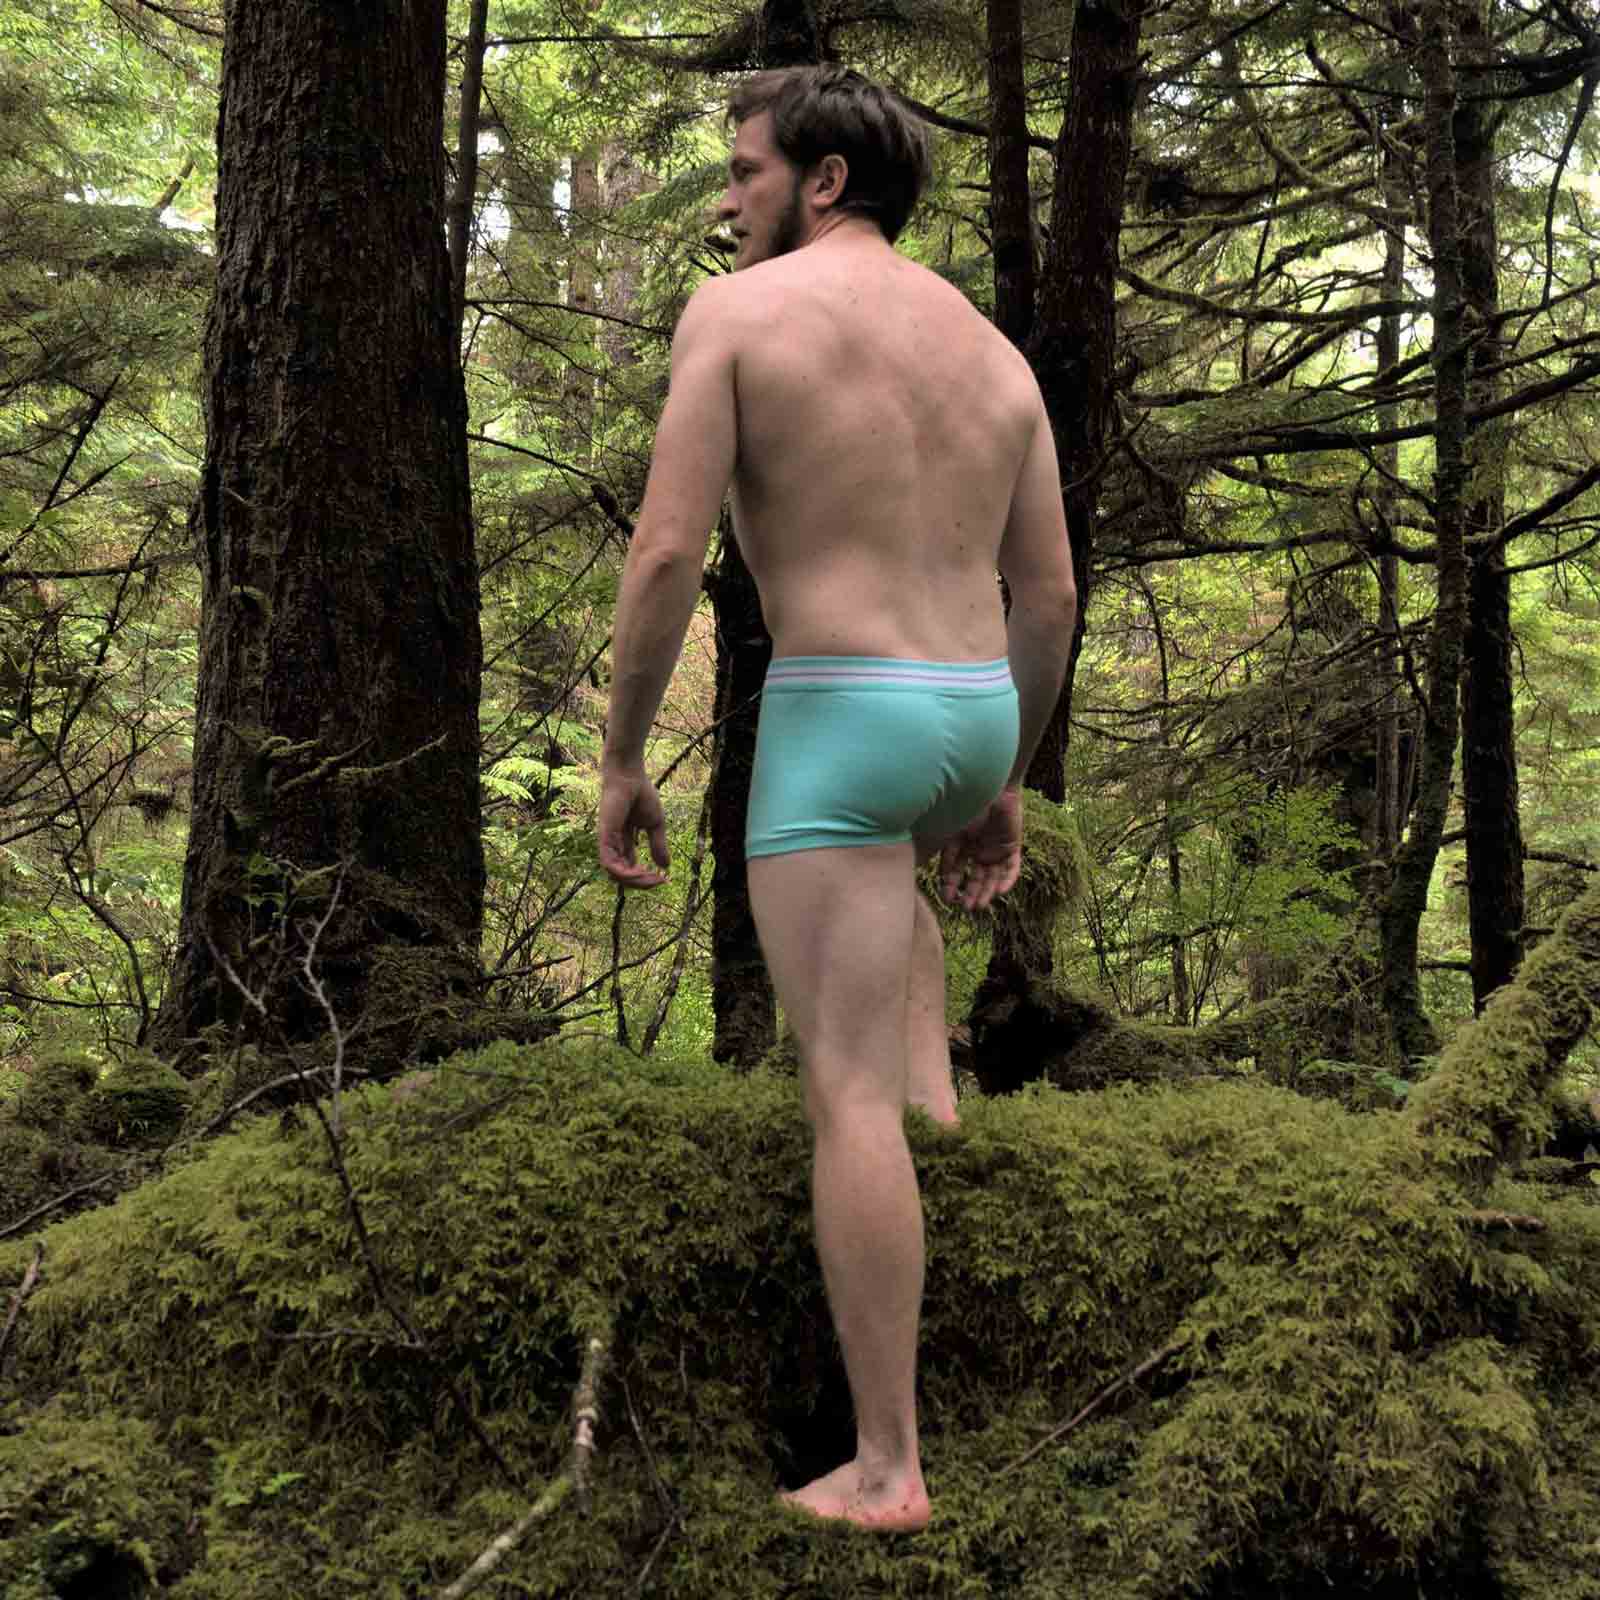 Turquoise organic cotton boxer shorts from Bluebuck